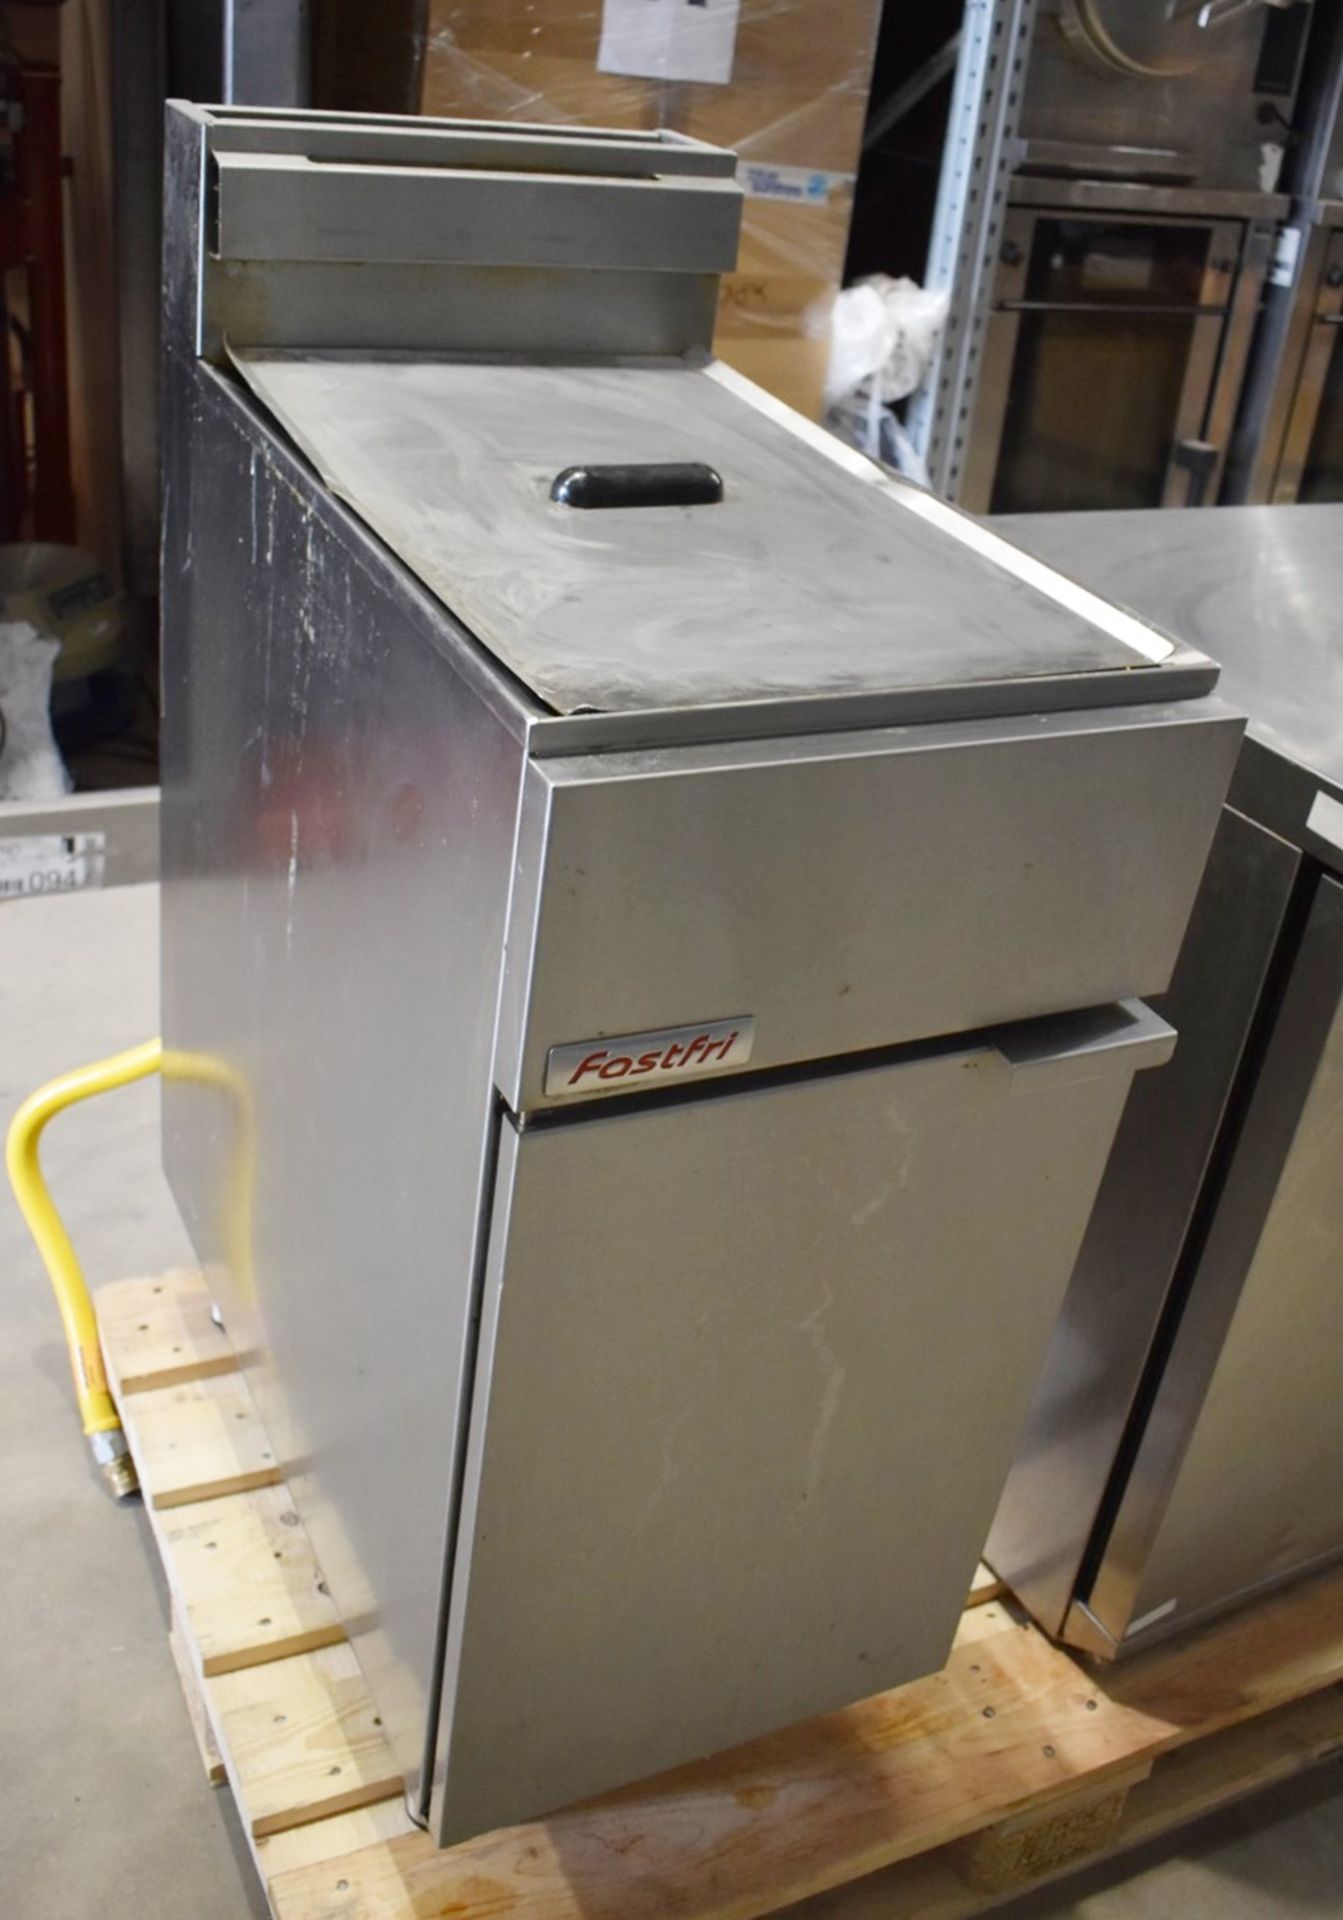 1 x Moffat Fast Fri FF18 Single Tank Commercial Gas Fryer With Stainless Steel Exterior - Image 4 of 13